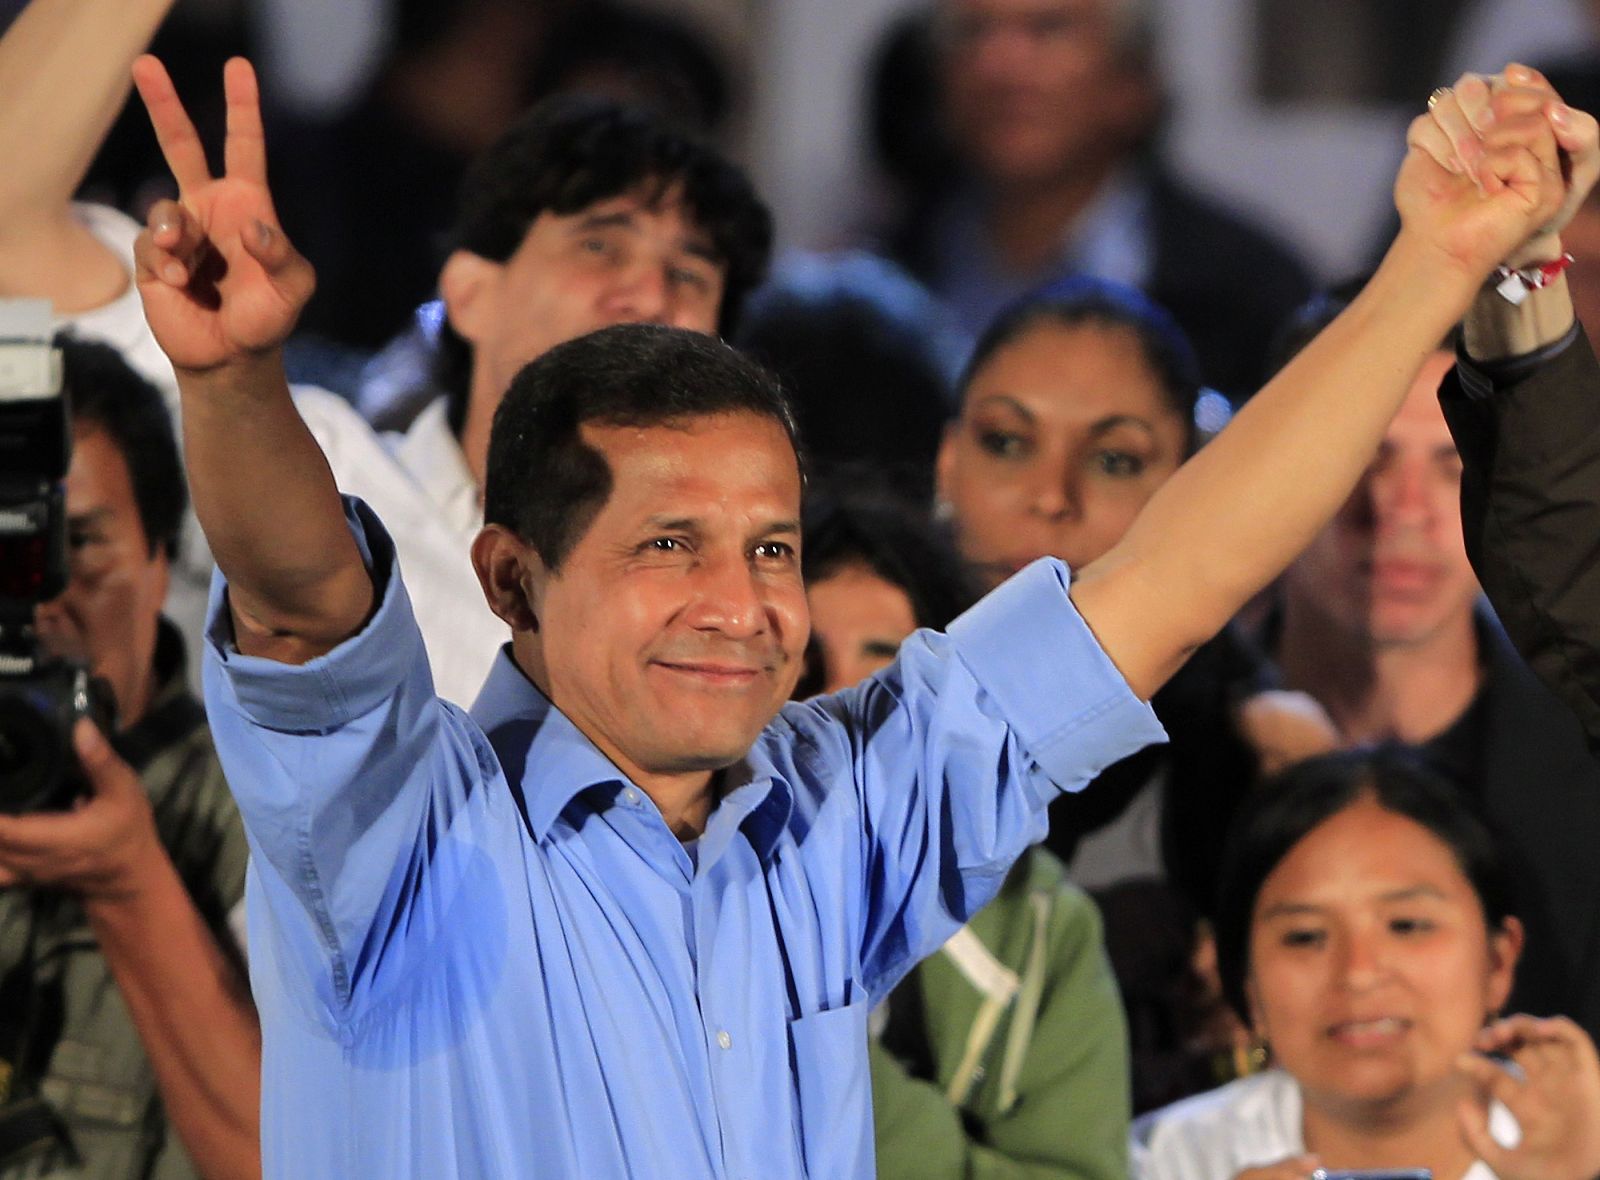 Peru's presidential candidate Humala greets supporters at the end his closing campaign rally in Lima